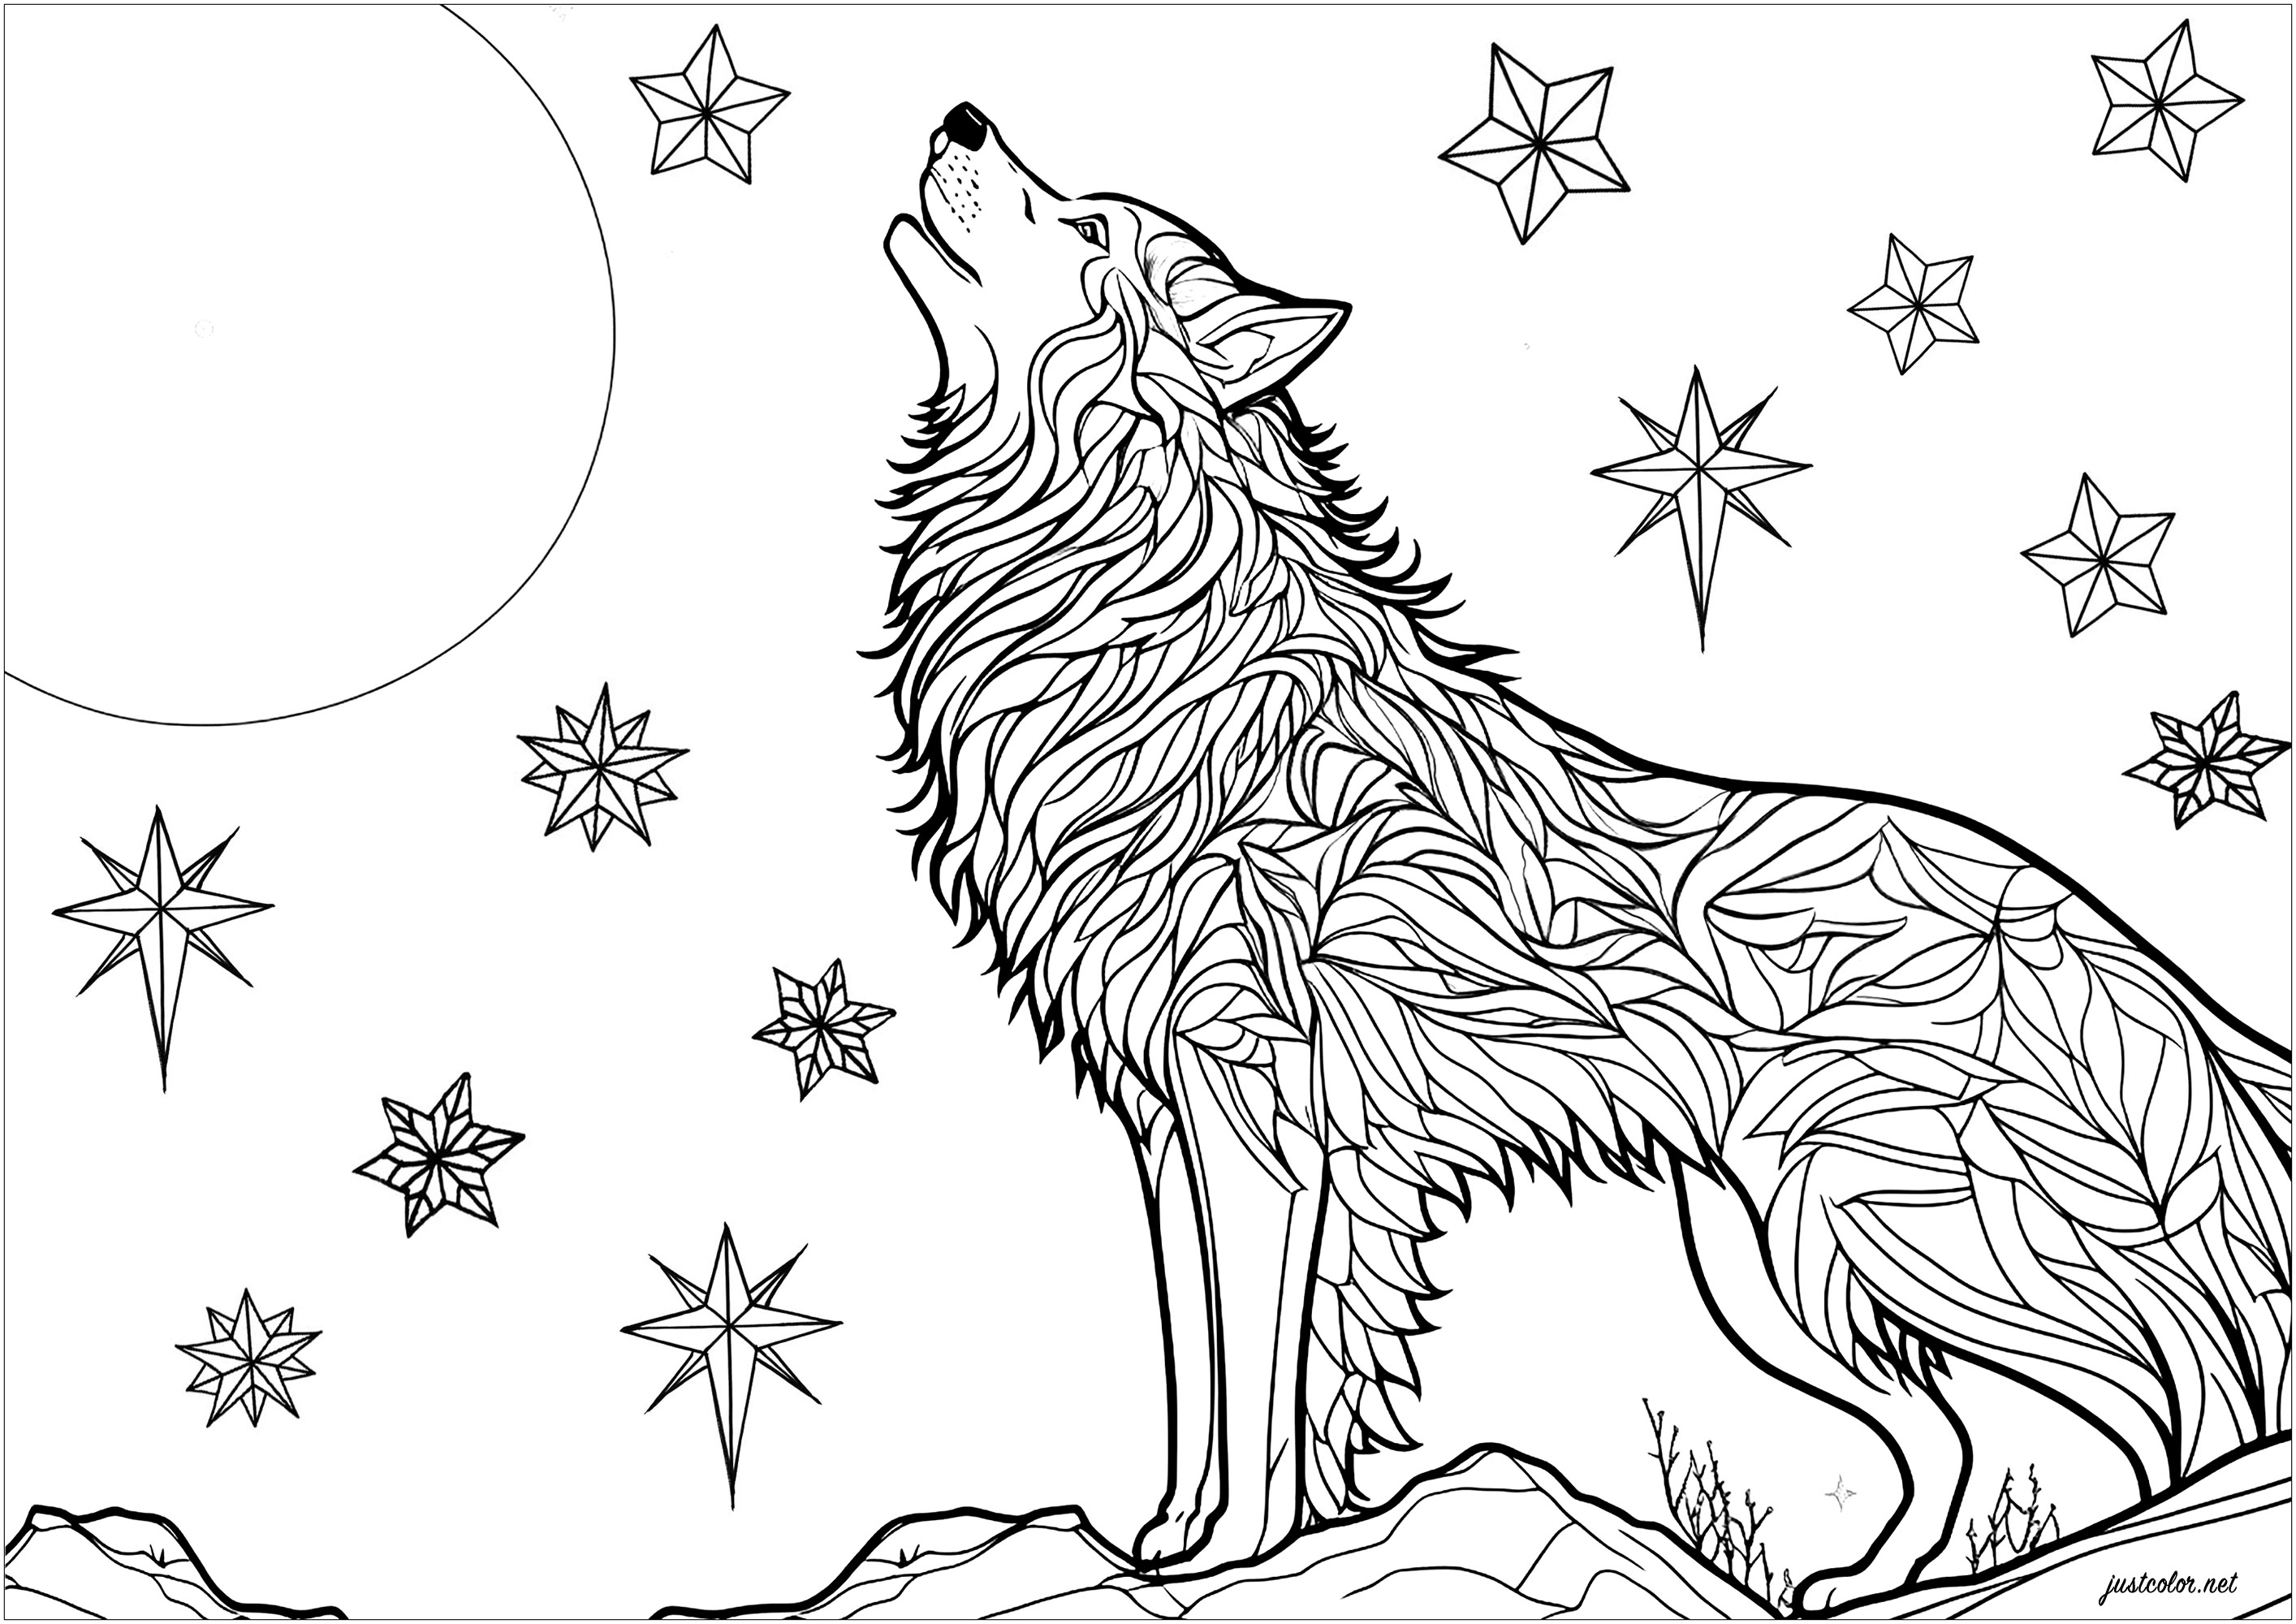 Coloring a wolf howling in the moonlight. Magnificent scene with a wolf howling at night, resting on a rock. Twinkling stars can be seen in the night sky. The wolf's fur patterns can be colored independently, for a result full of mystery and magic.